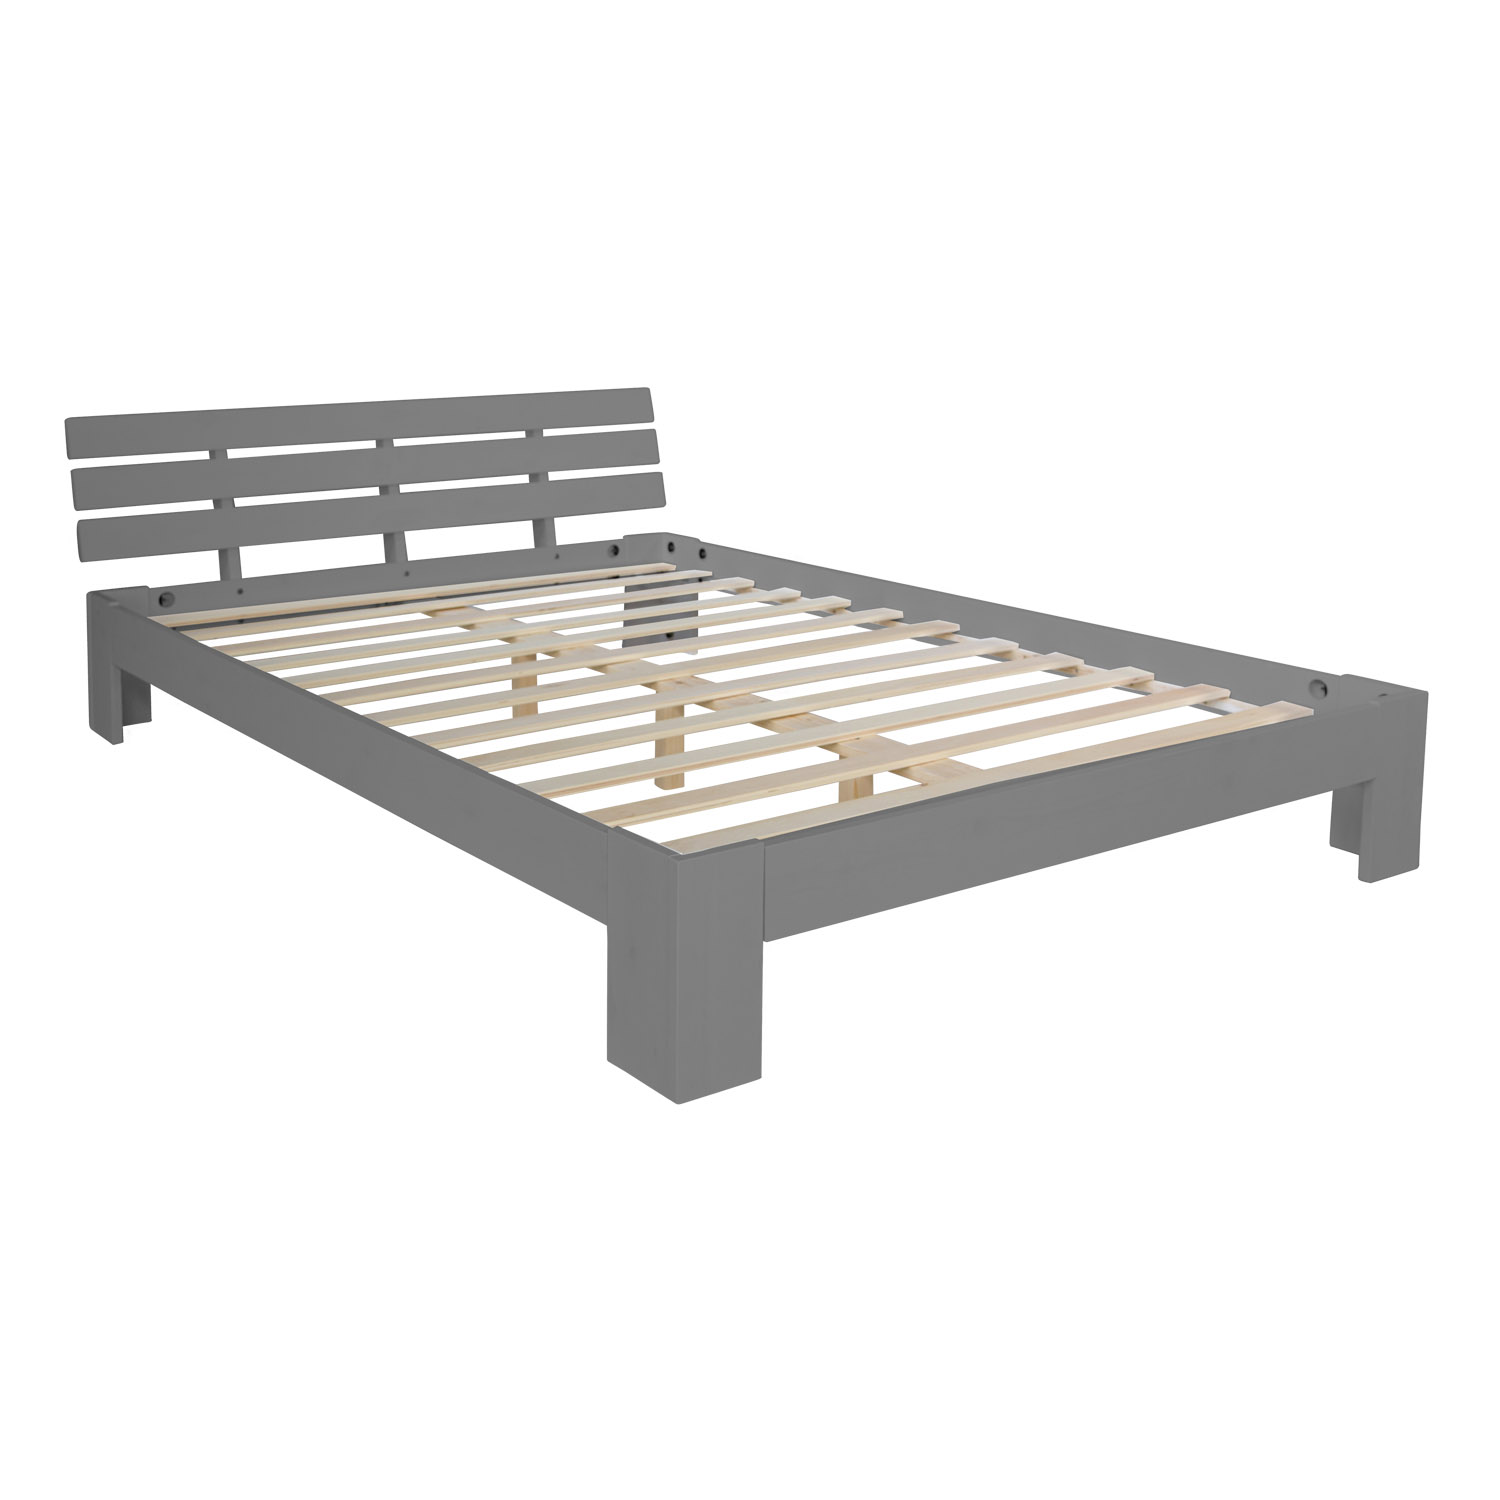 Wooden bed 90 120 140 160 180 cm white natural or grey double bed futon bed frame solid wood single bed